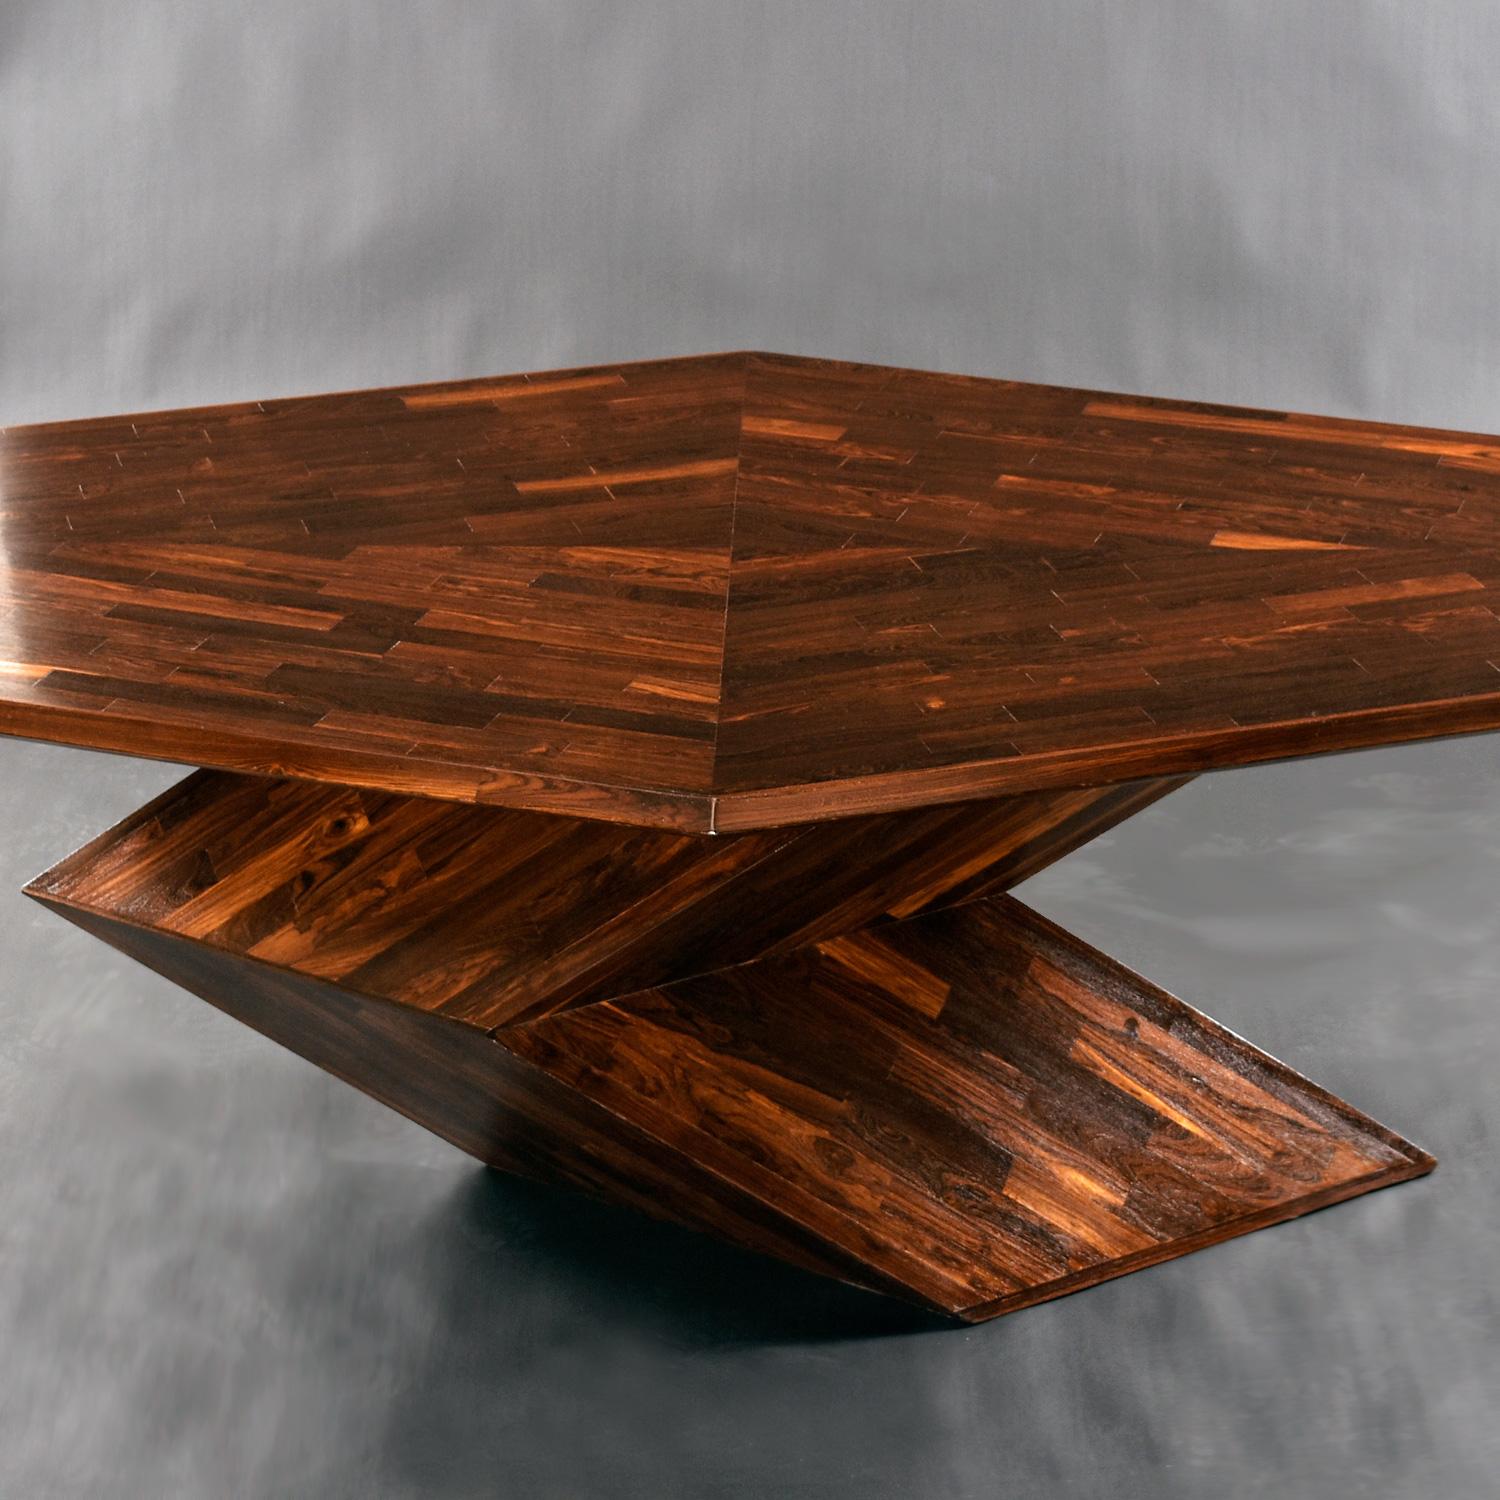 Mexican Cocobolo Rosewood Dining Table by Don S. Shoemaker for Señal S.A. of Mexico For Sale